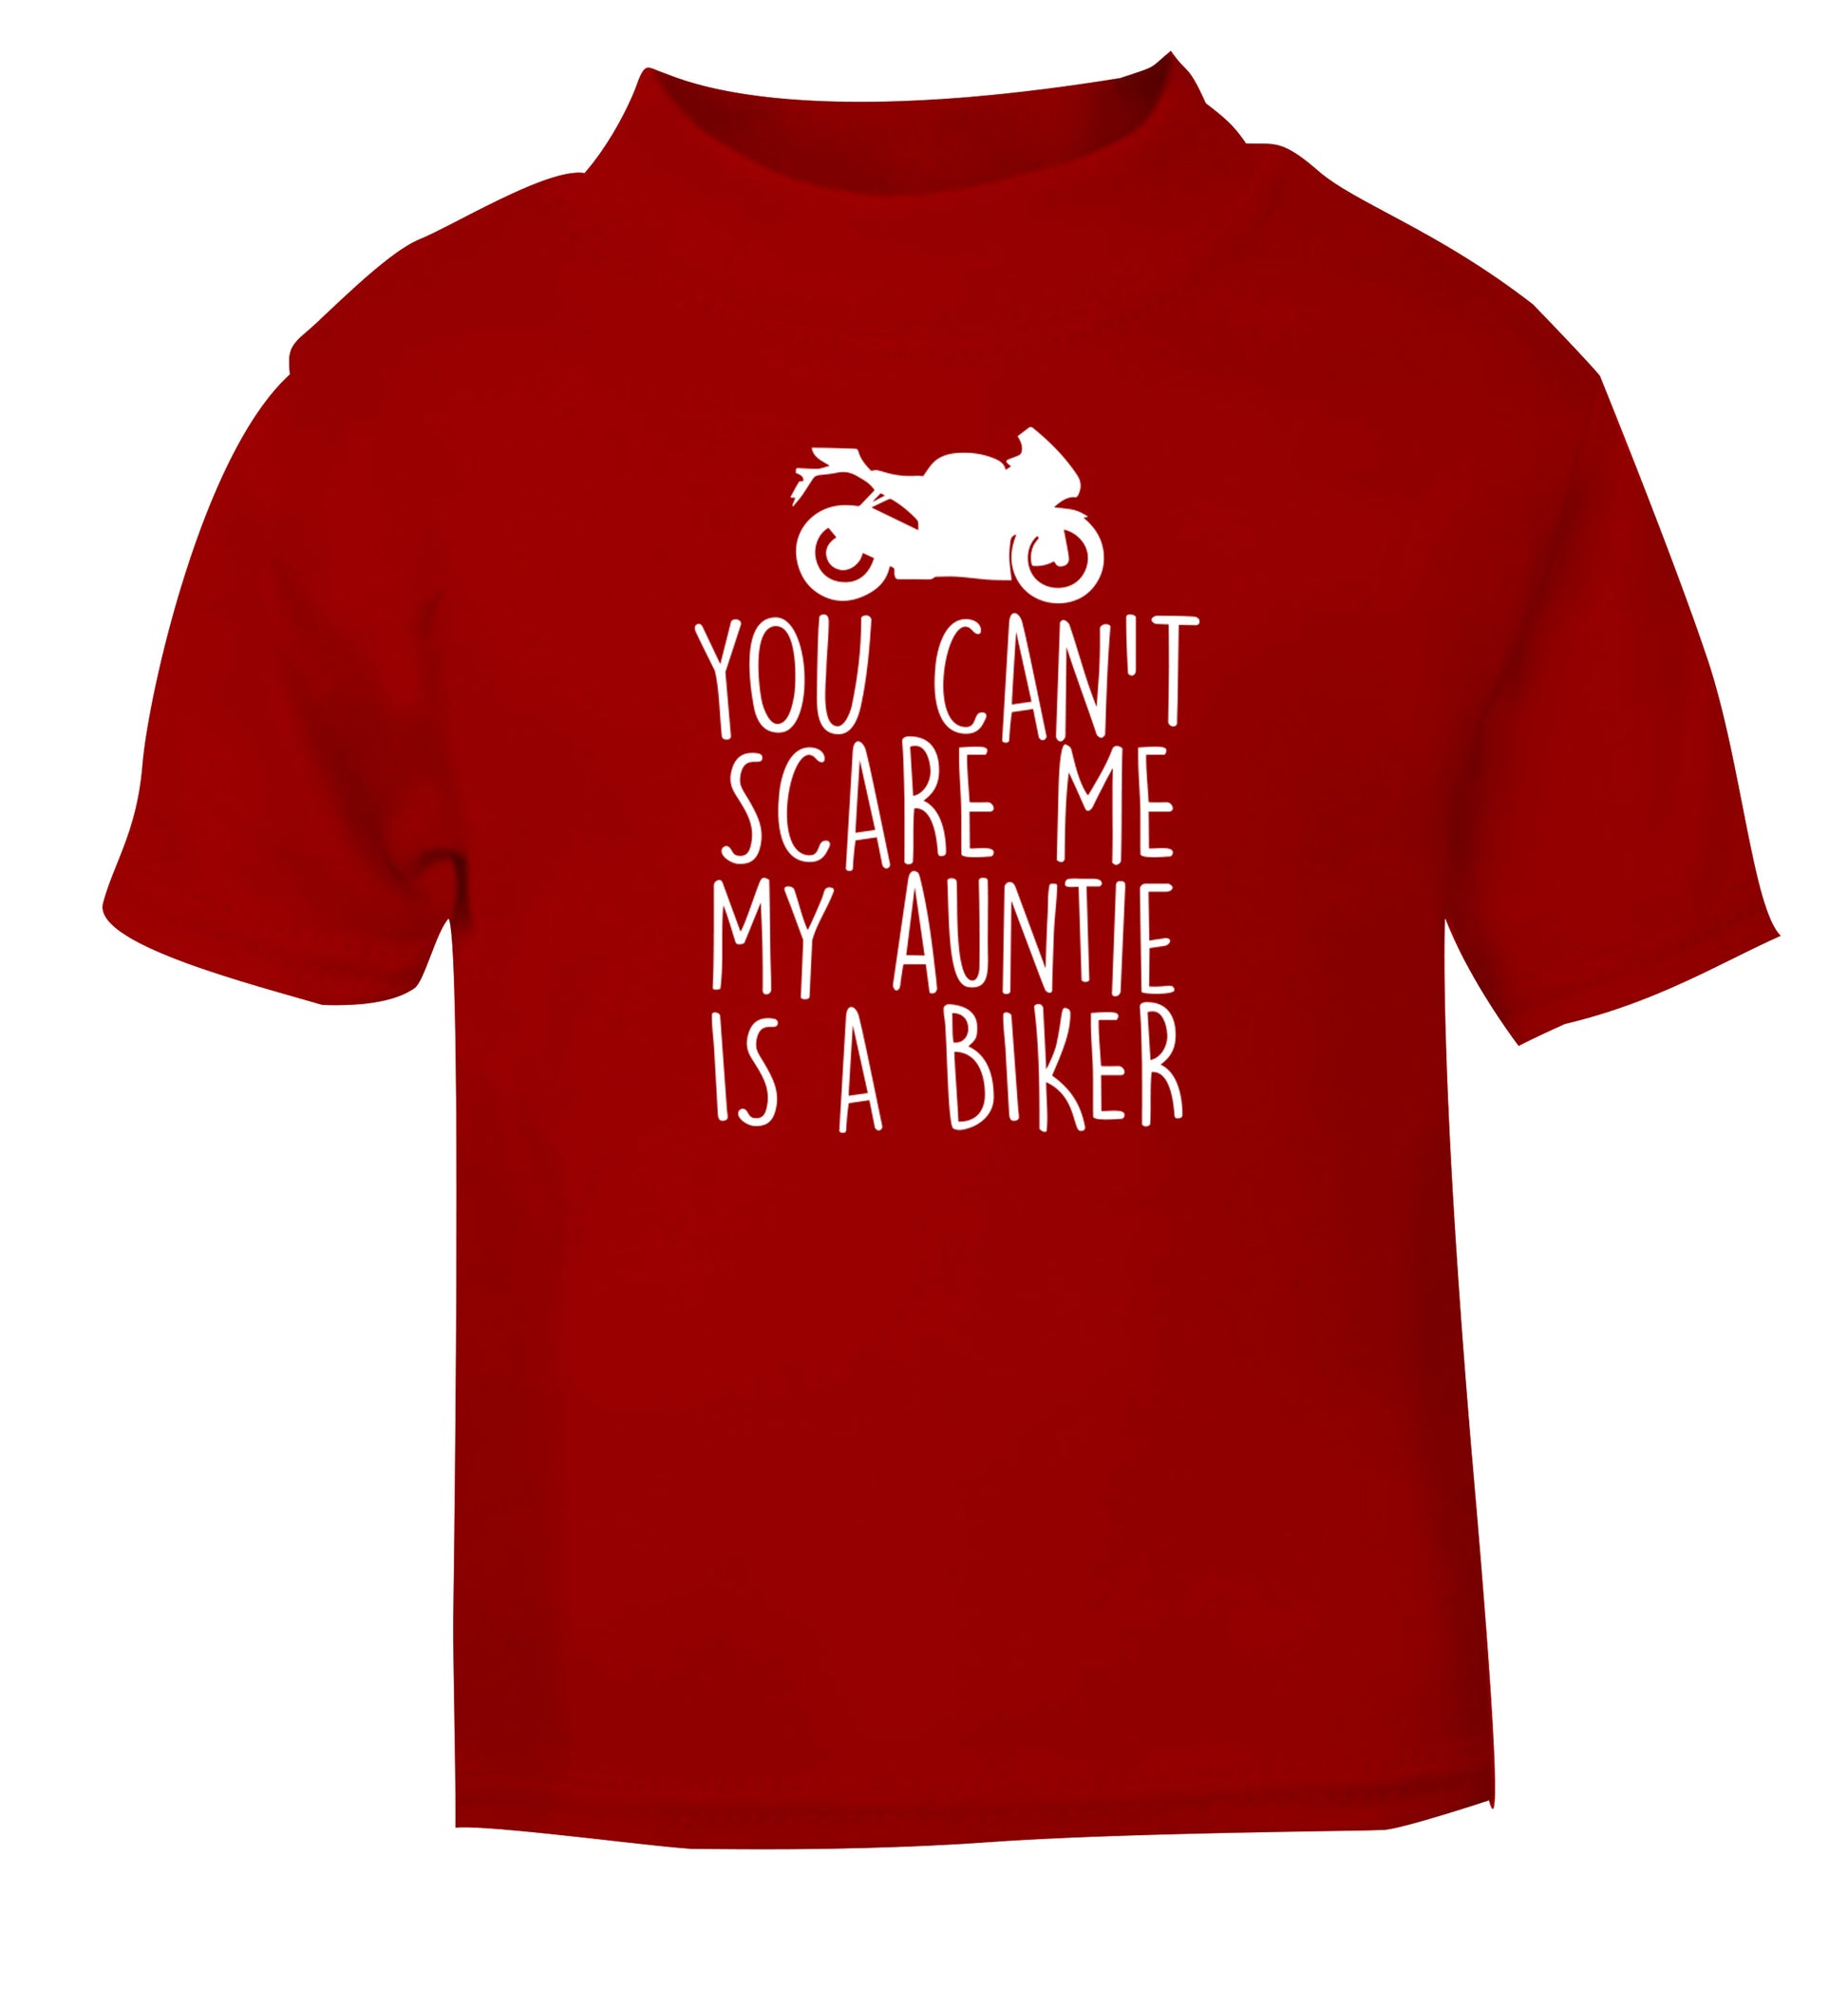 You can't scare me my auntie is a biker red Baby Toddler Tshirt 2 Years